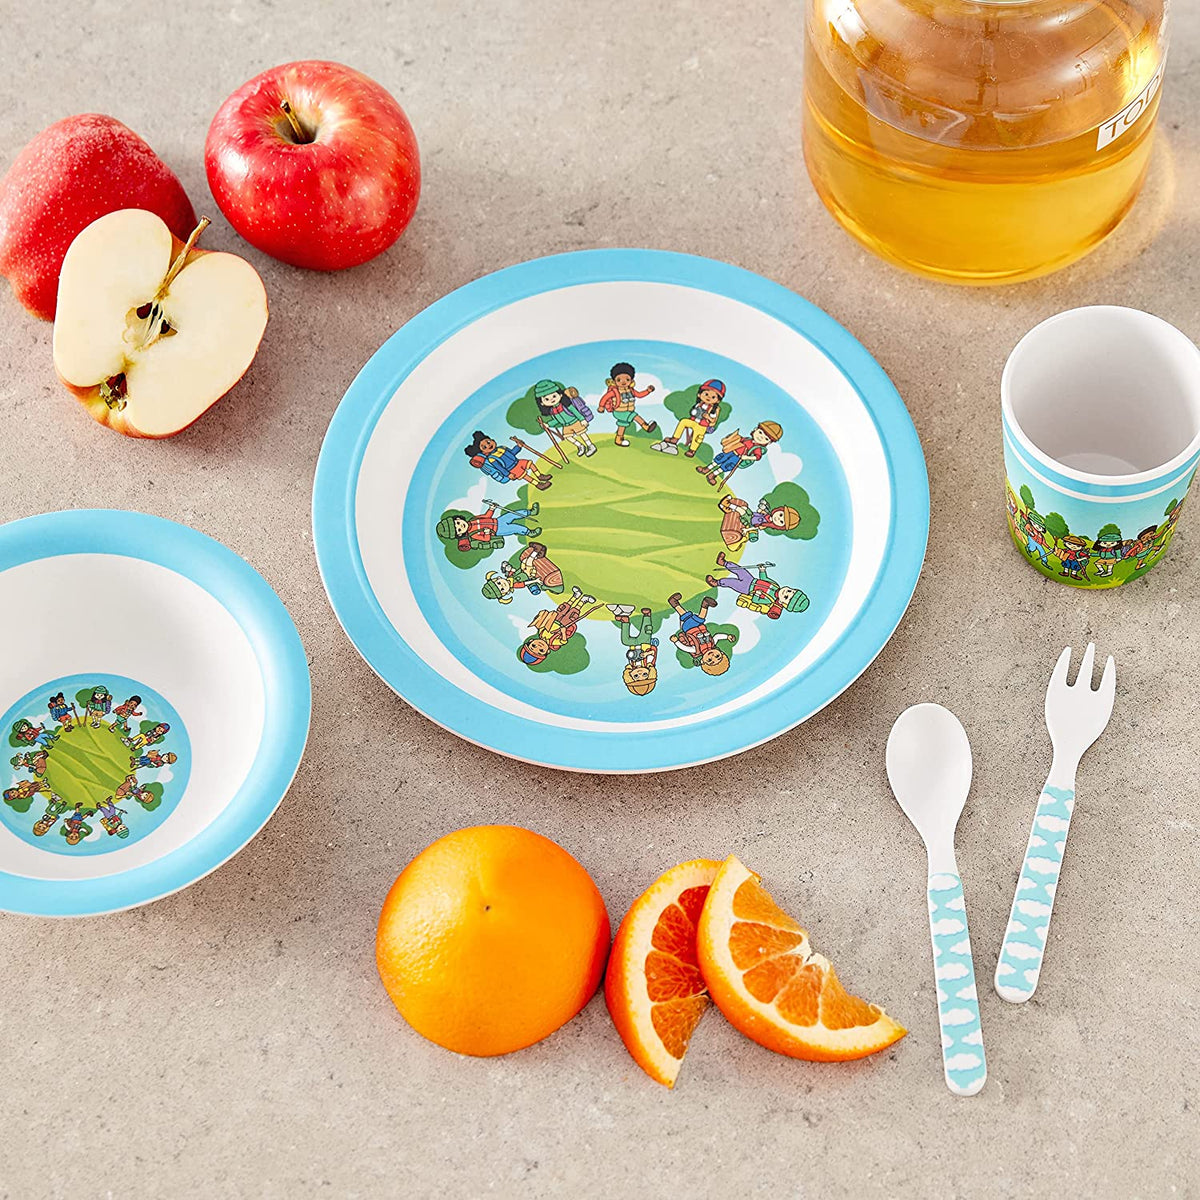 Together in Nature  Hikers 5-Piece Mealtime Set